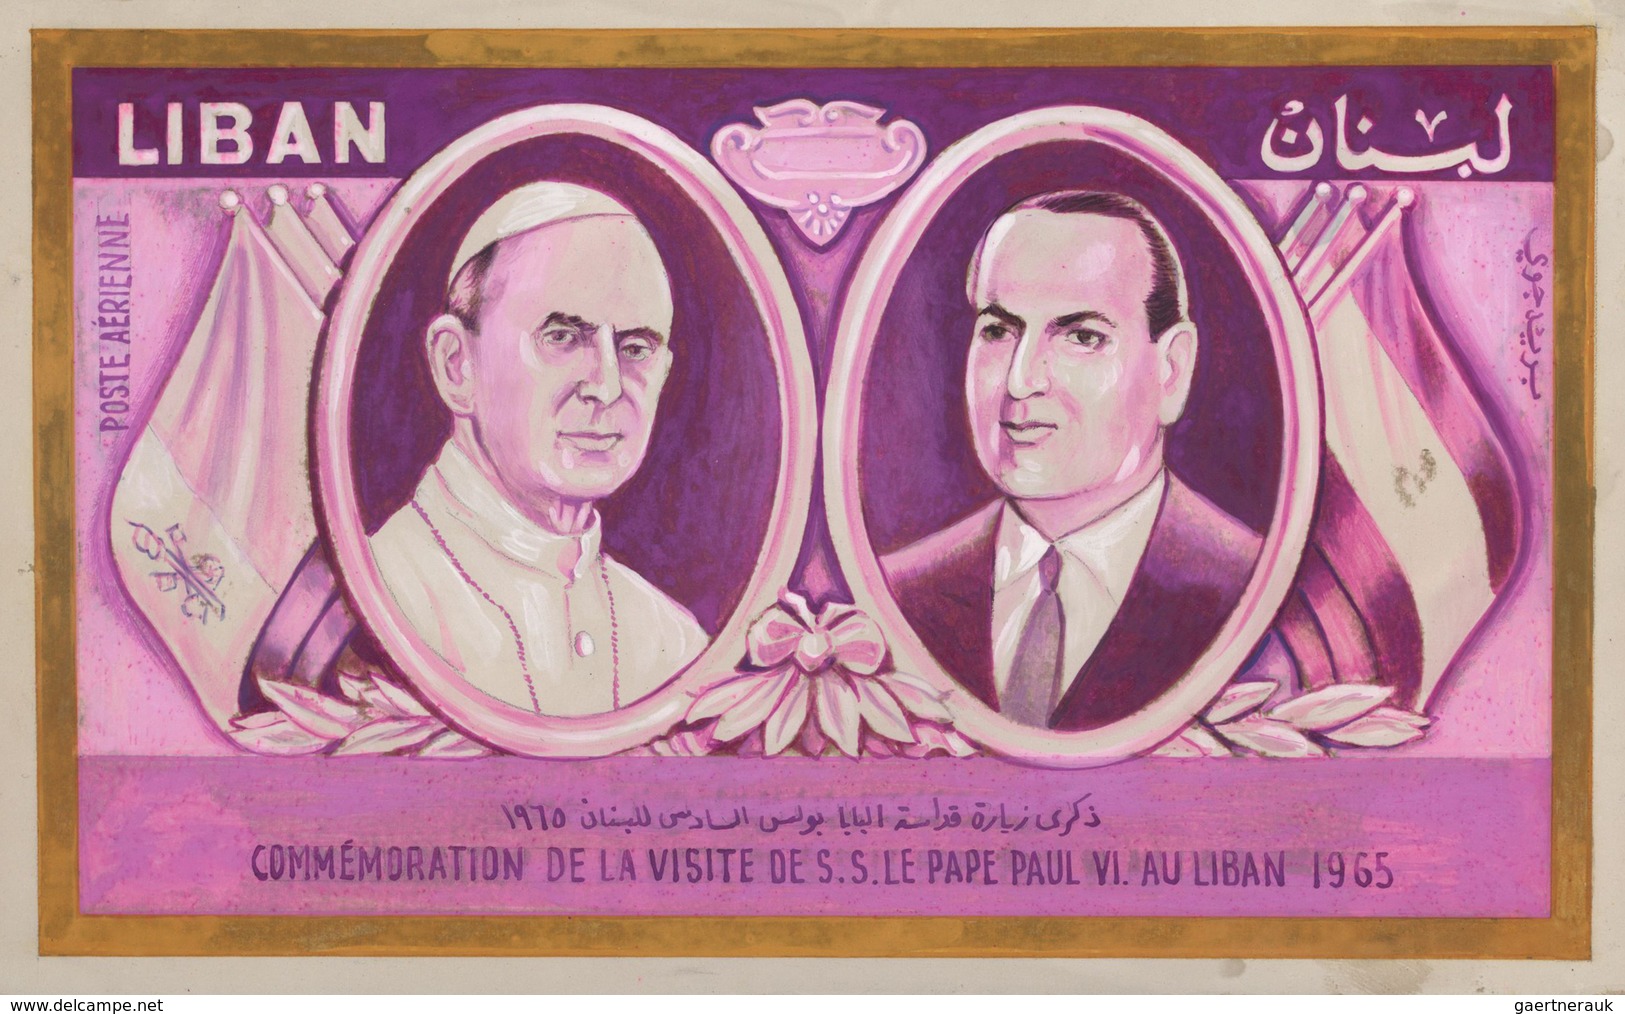 Libanon: 1930/1966. Whopping collection of 95 ARTIST'S DRAWINGS for stamps of the named period, stor